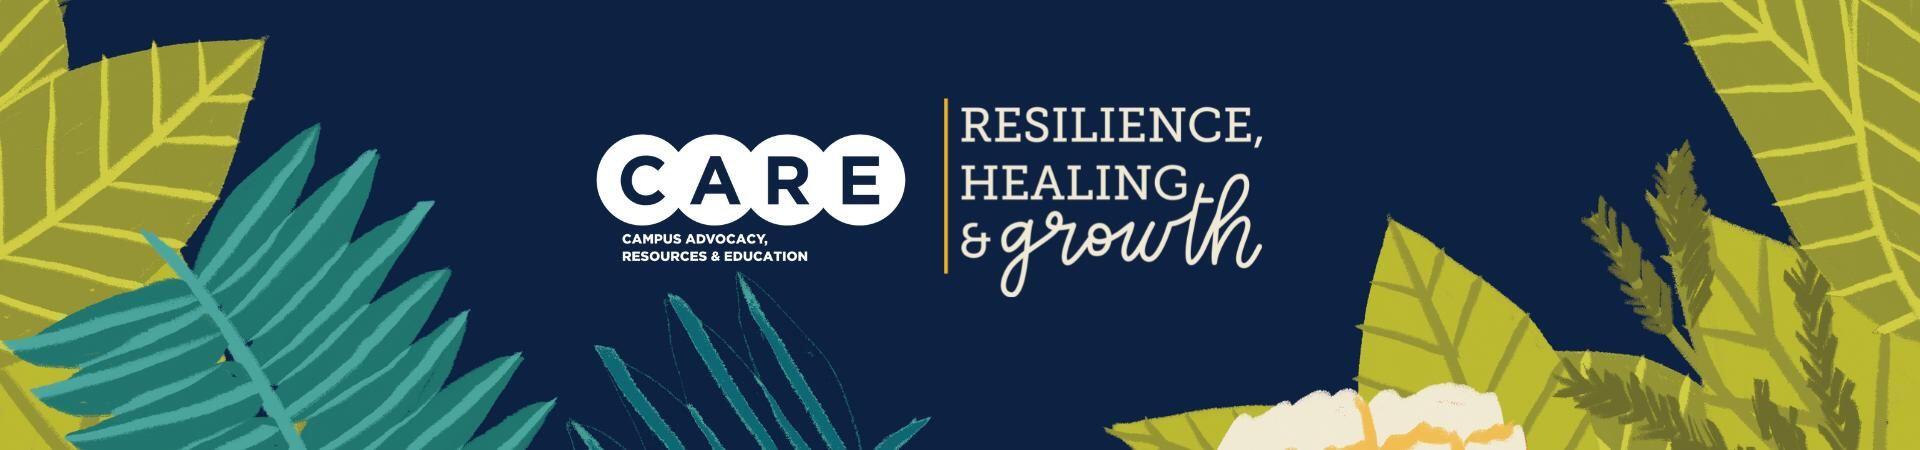 CARE Campus Advocacy Resources and Education. Resilience, Healing, and Growth